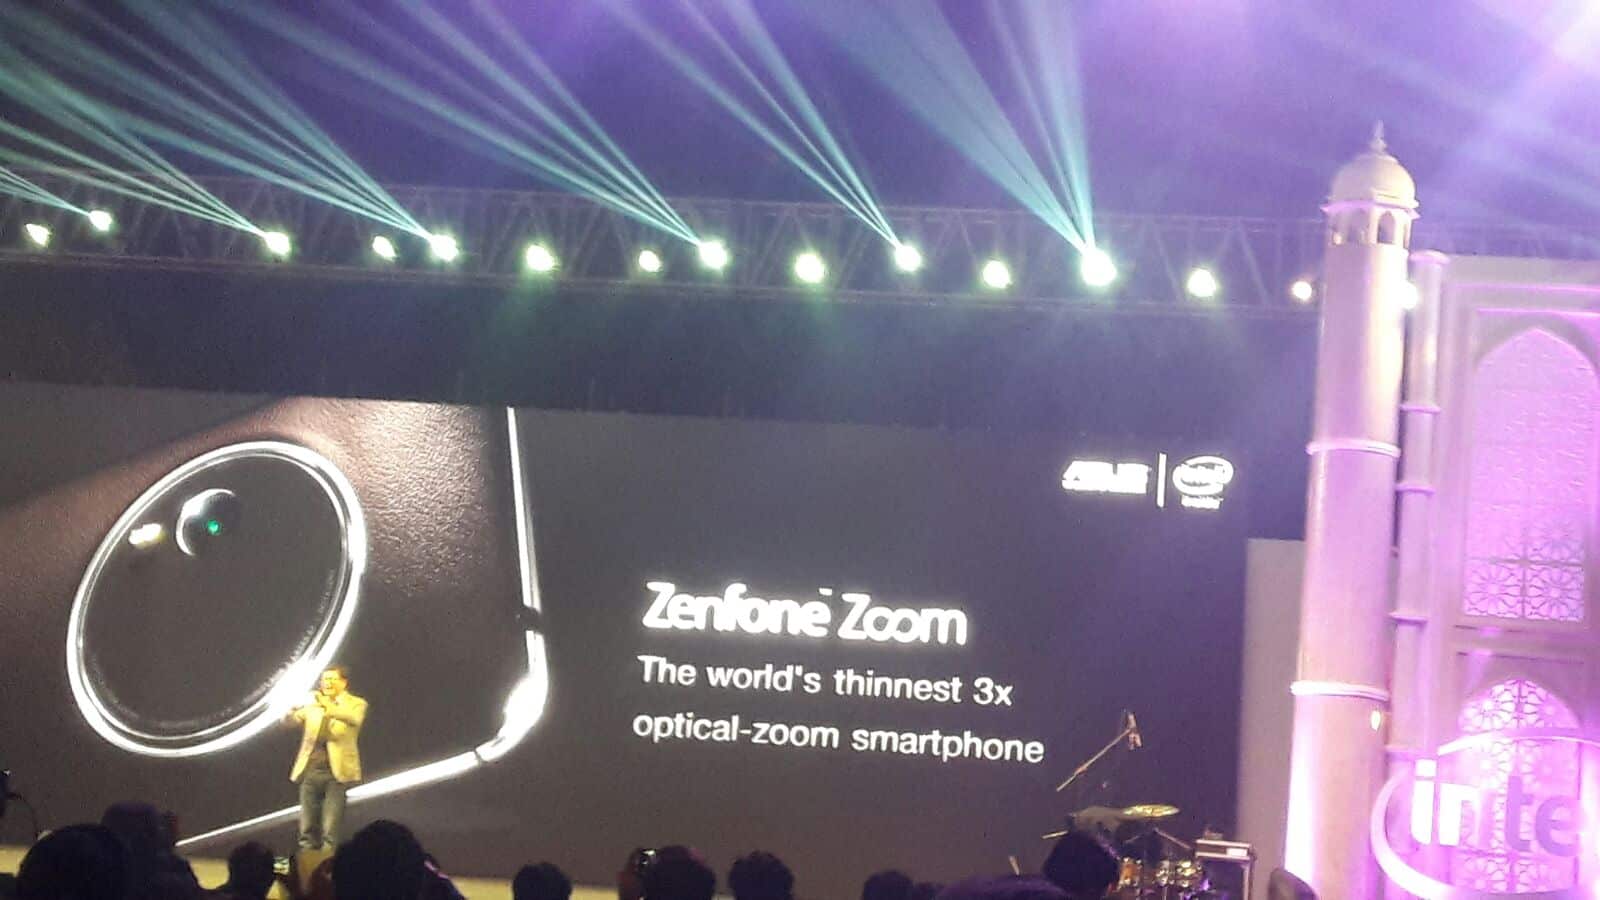 Asus ZenFone Zoom unveiled: This is the World's thinnest 3X Optical-Zoom smartphone - 11